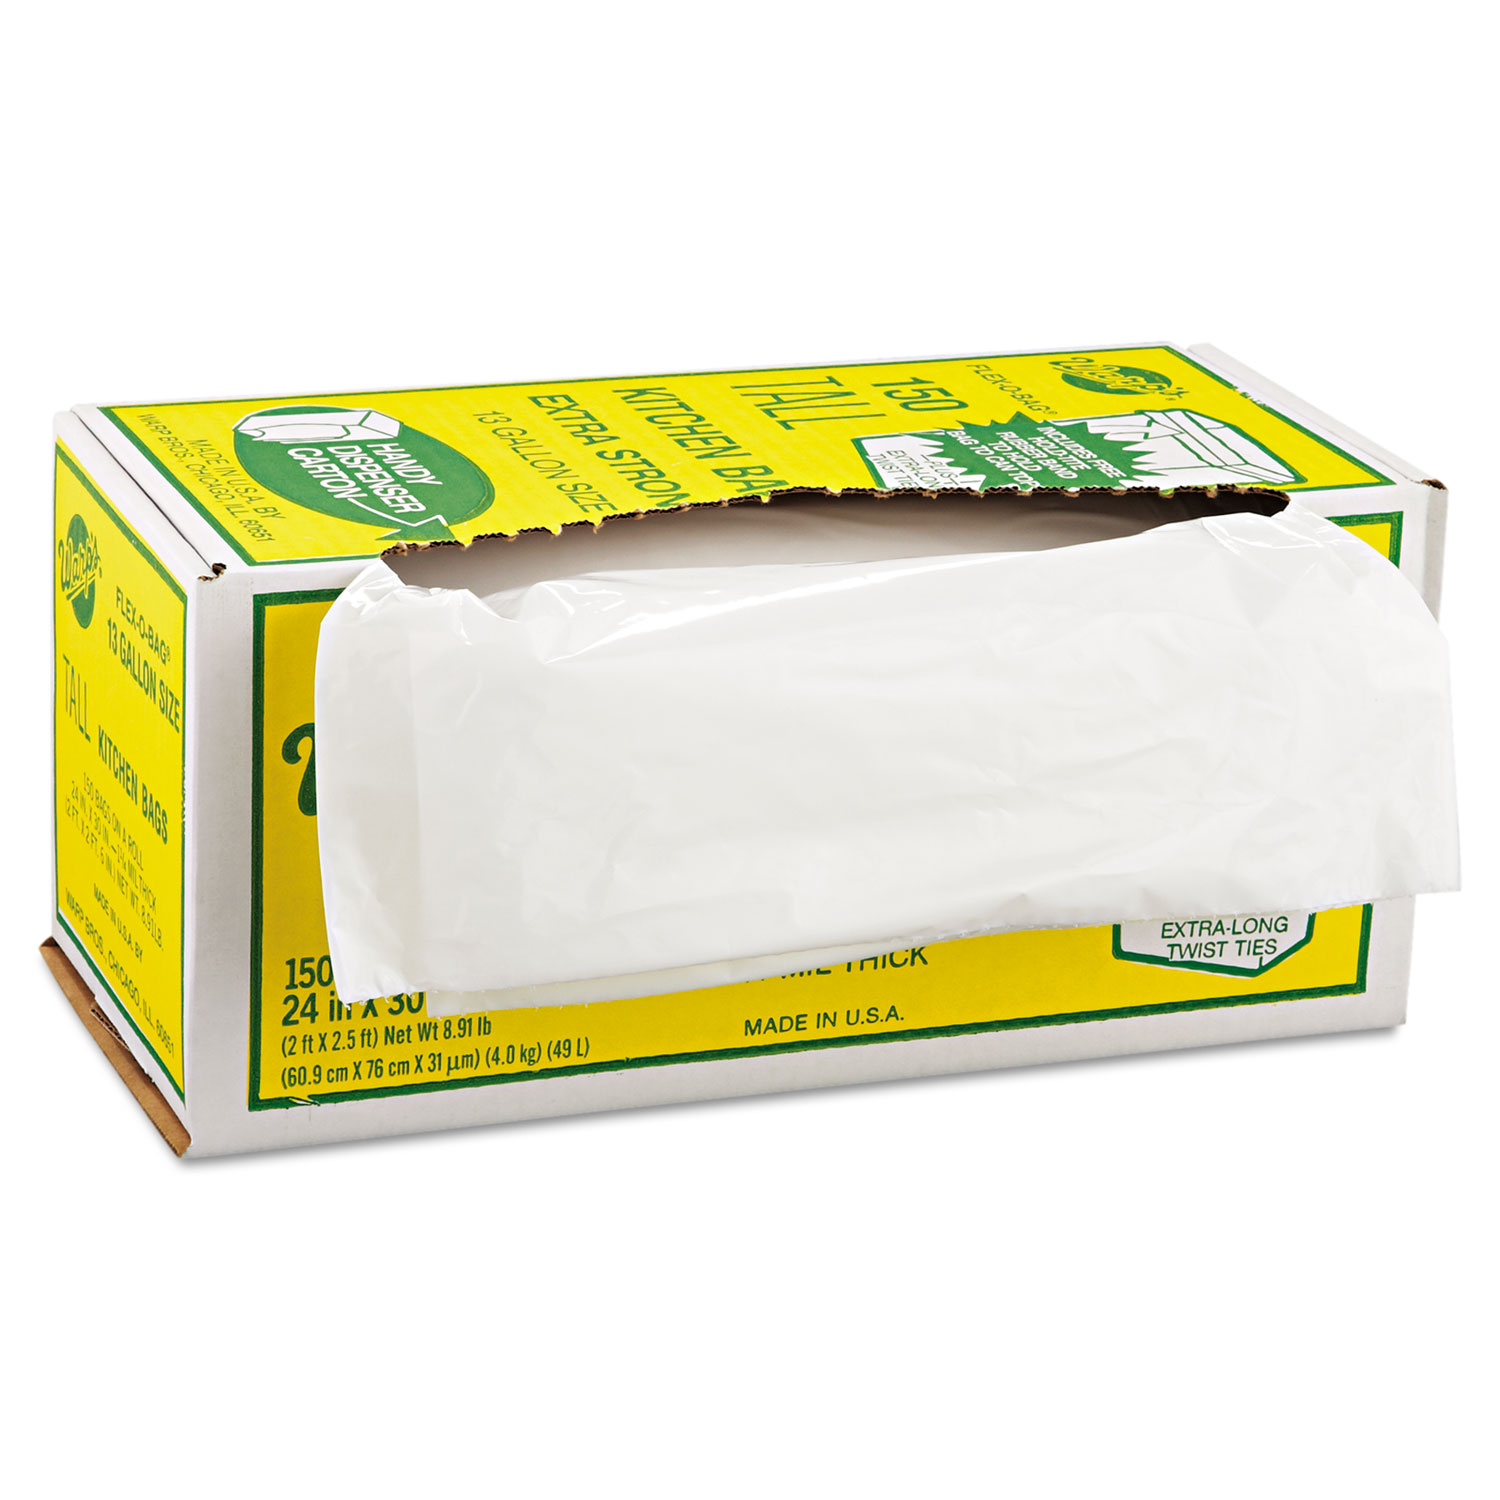  Warp's FB13-150 Industrial Strength Flex-O-Bags Trash Can Liners, 13 gal, 1.25 mil, 24 x 30, White (WRPFB13150) 